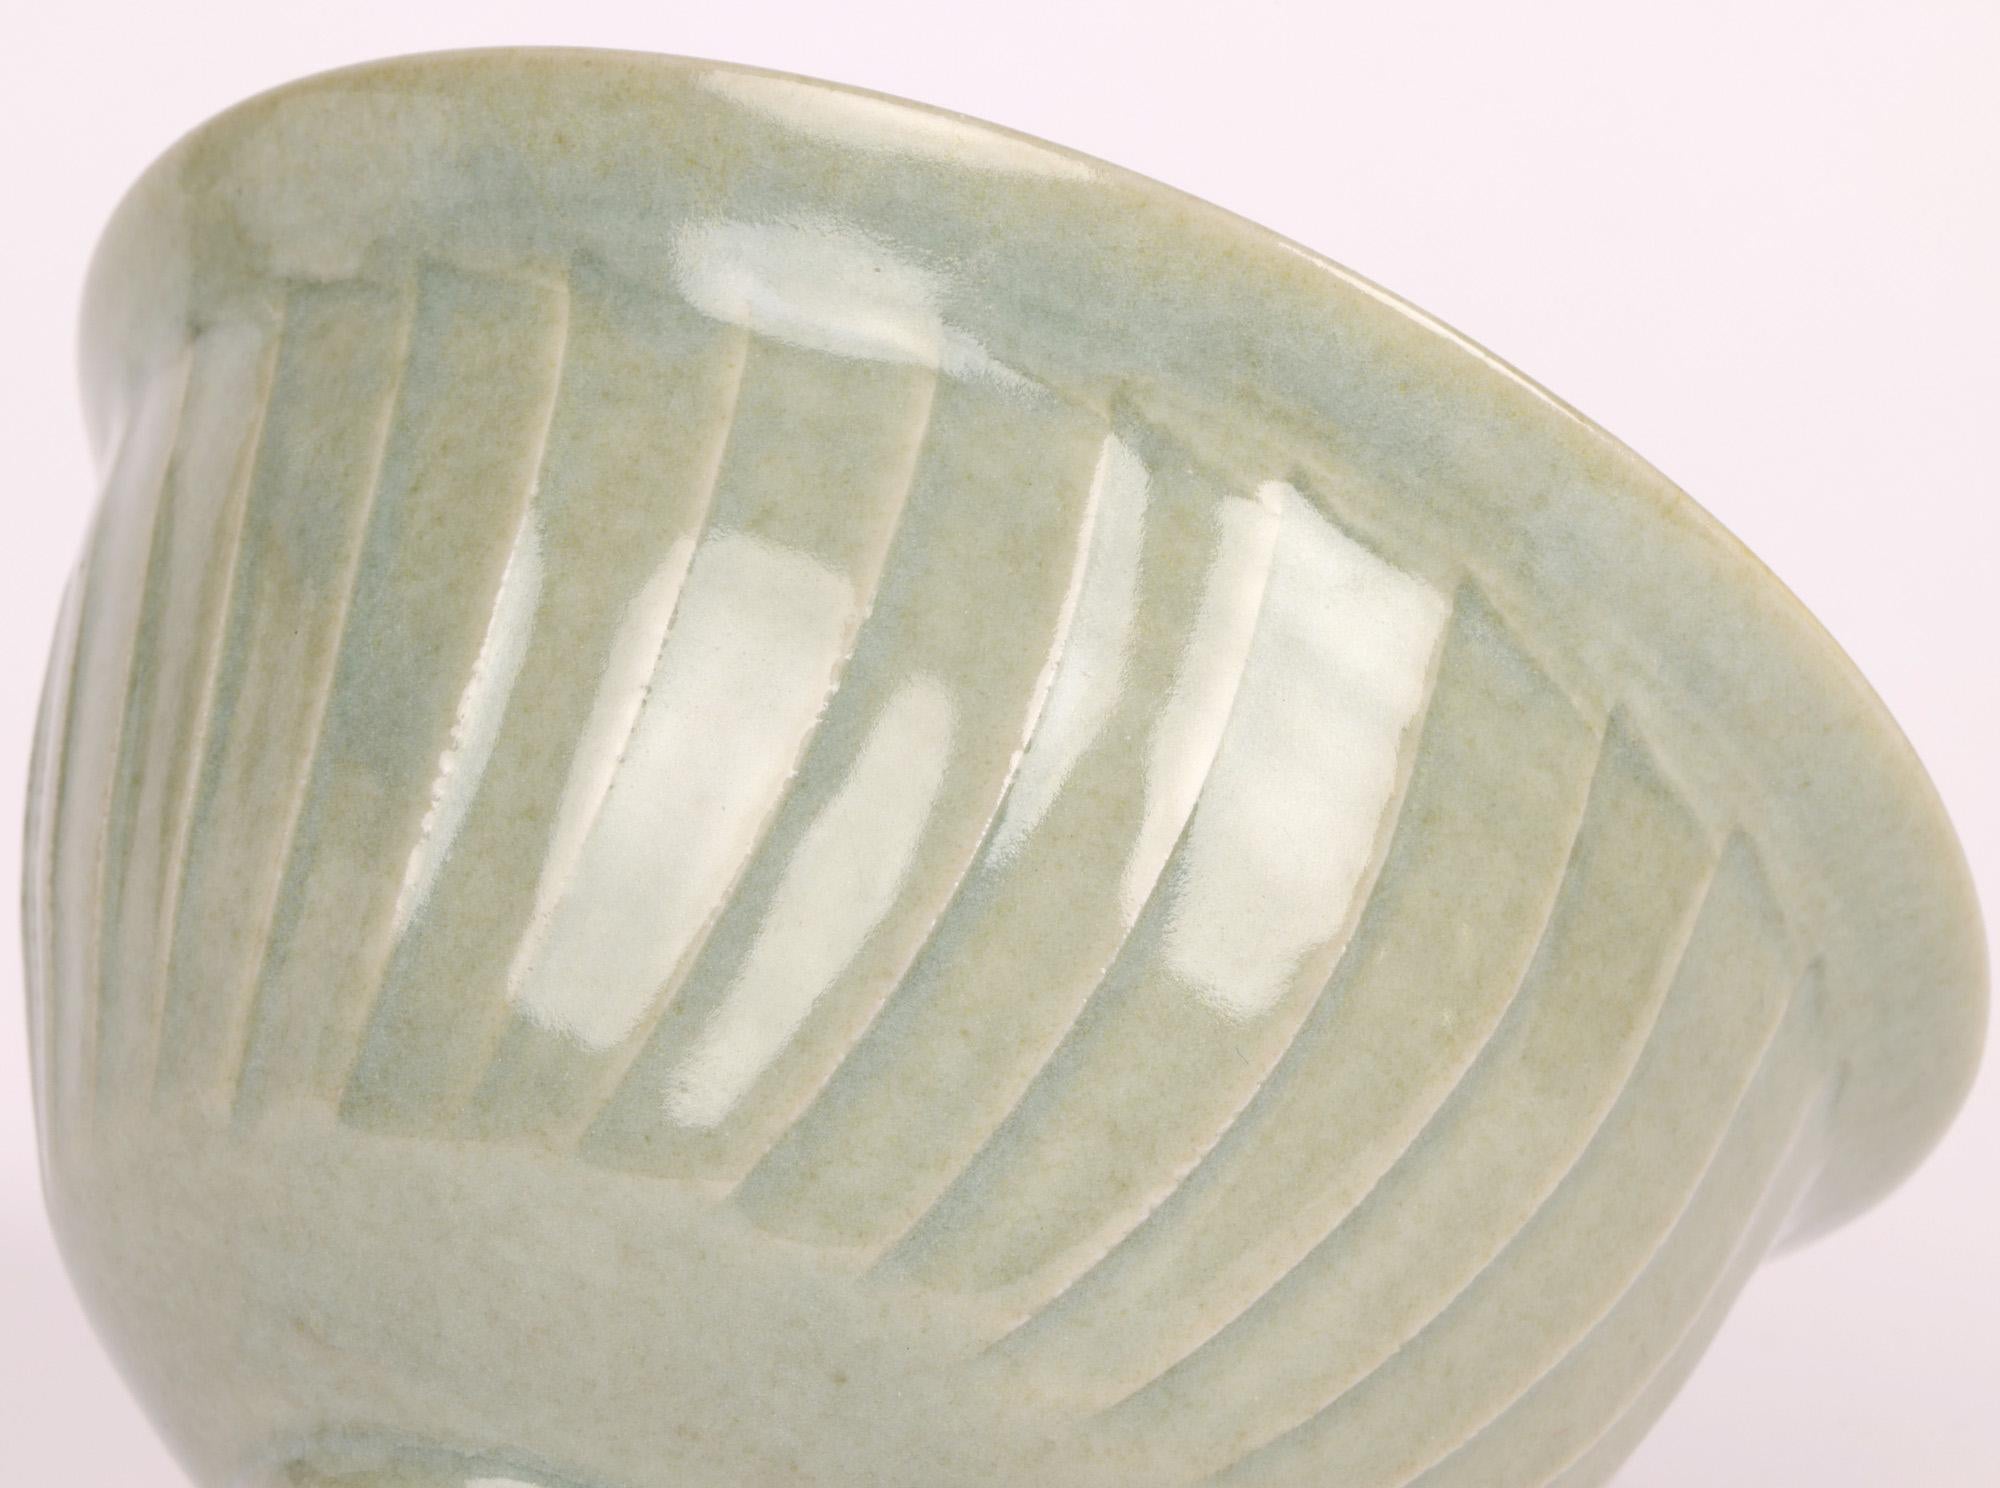 A very fine Lowerdown Pottery celadon glazed porcelain bowl by renowned potter David Leach OBE (British, 1911-2005) and dating from around 1987. 

David Leach, the son of the highly acclaimed potter Bernard Leach worked at the Leach Pottery under